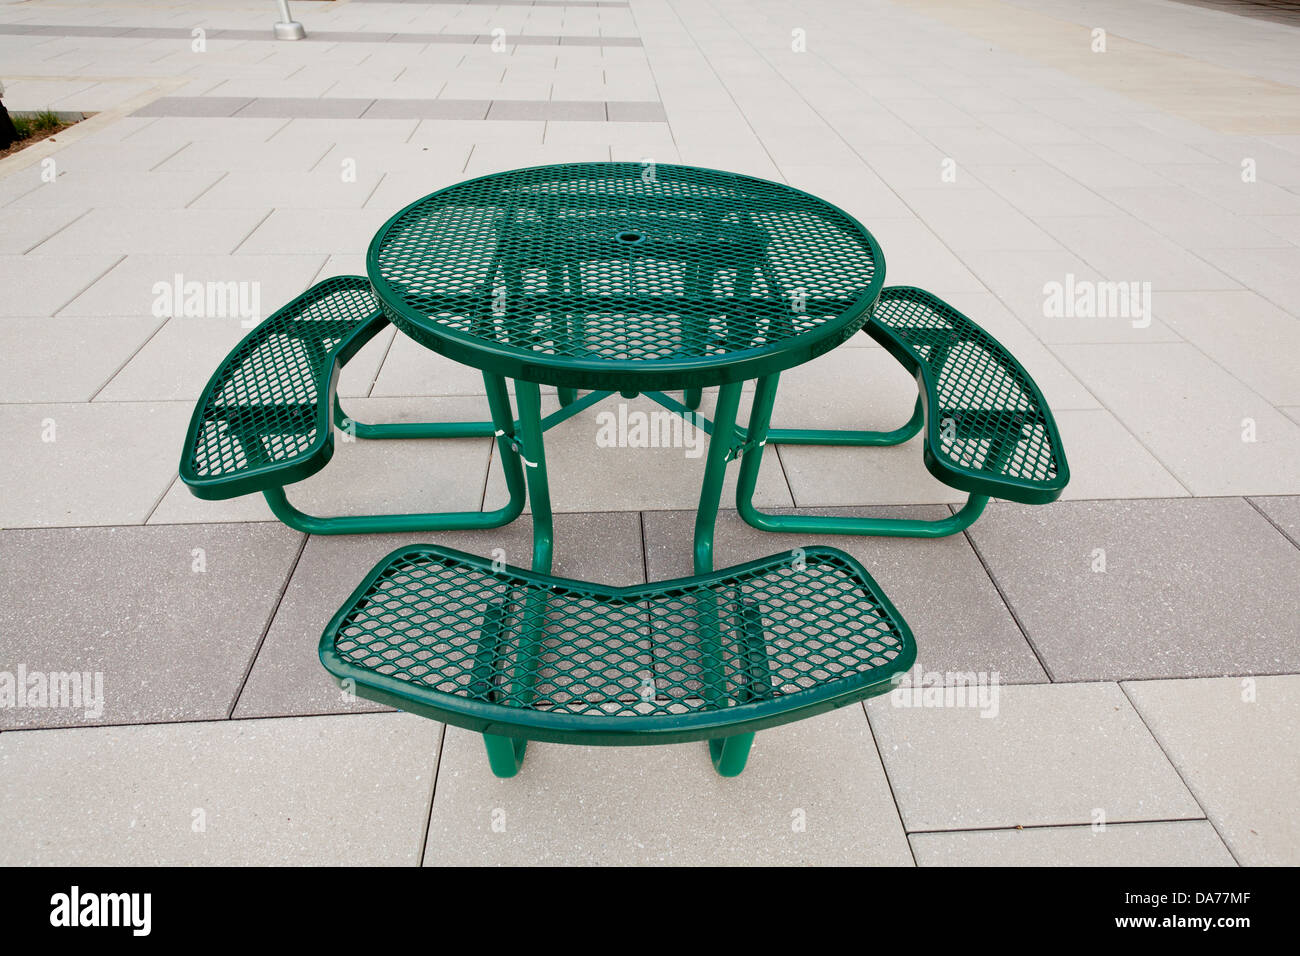 Round outdoor picnic table Stock Photo